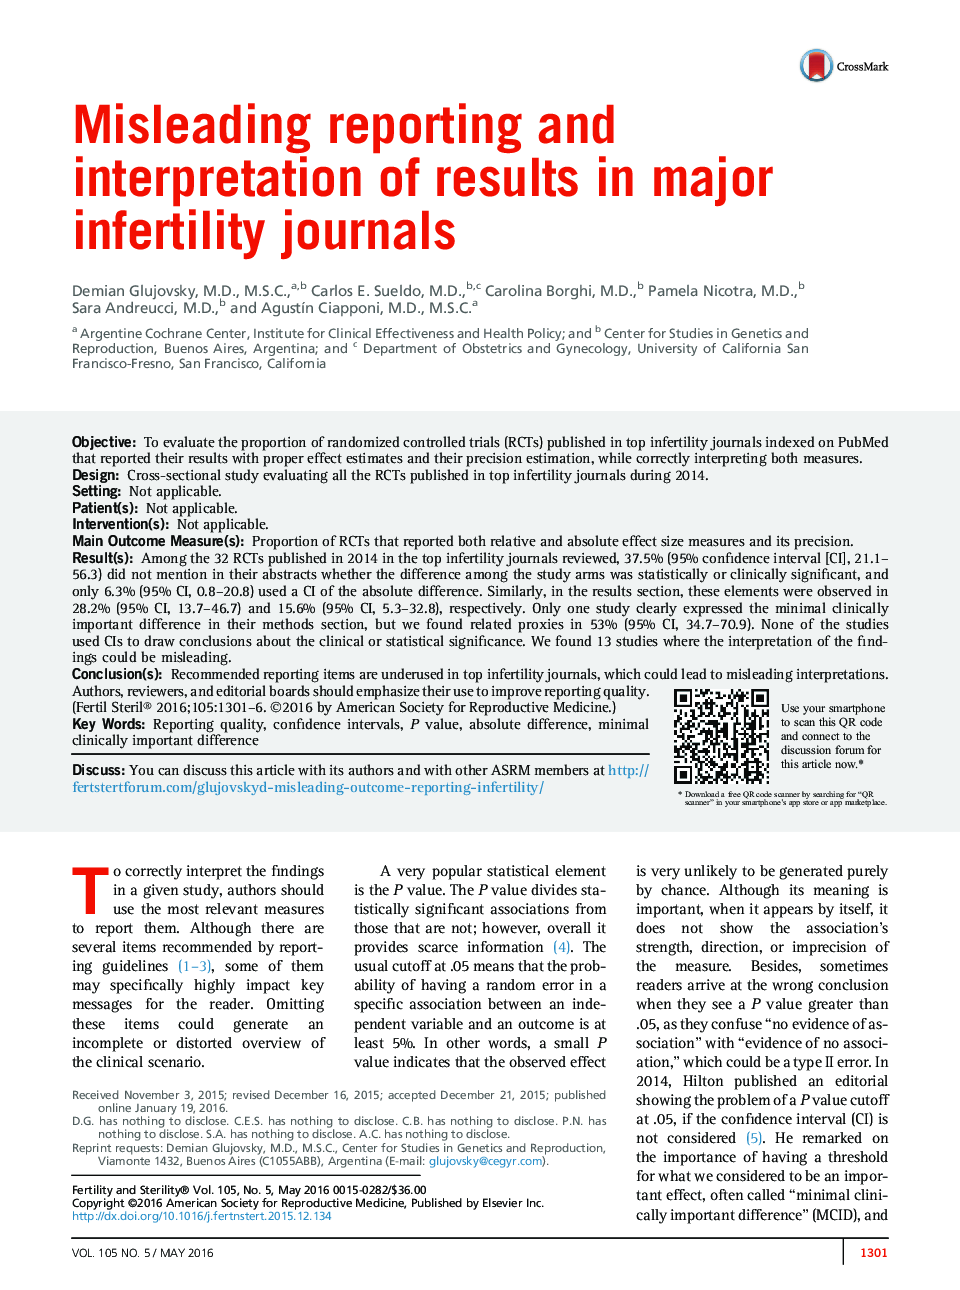 Misleading reporting and interpretation of results in major infertility journals